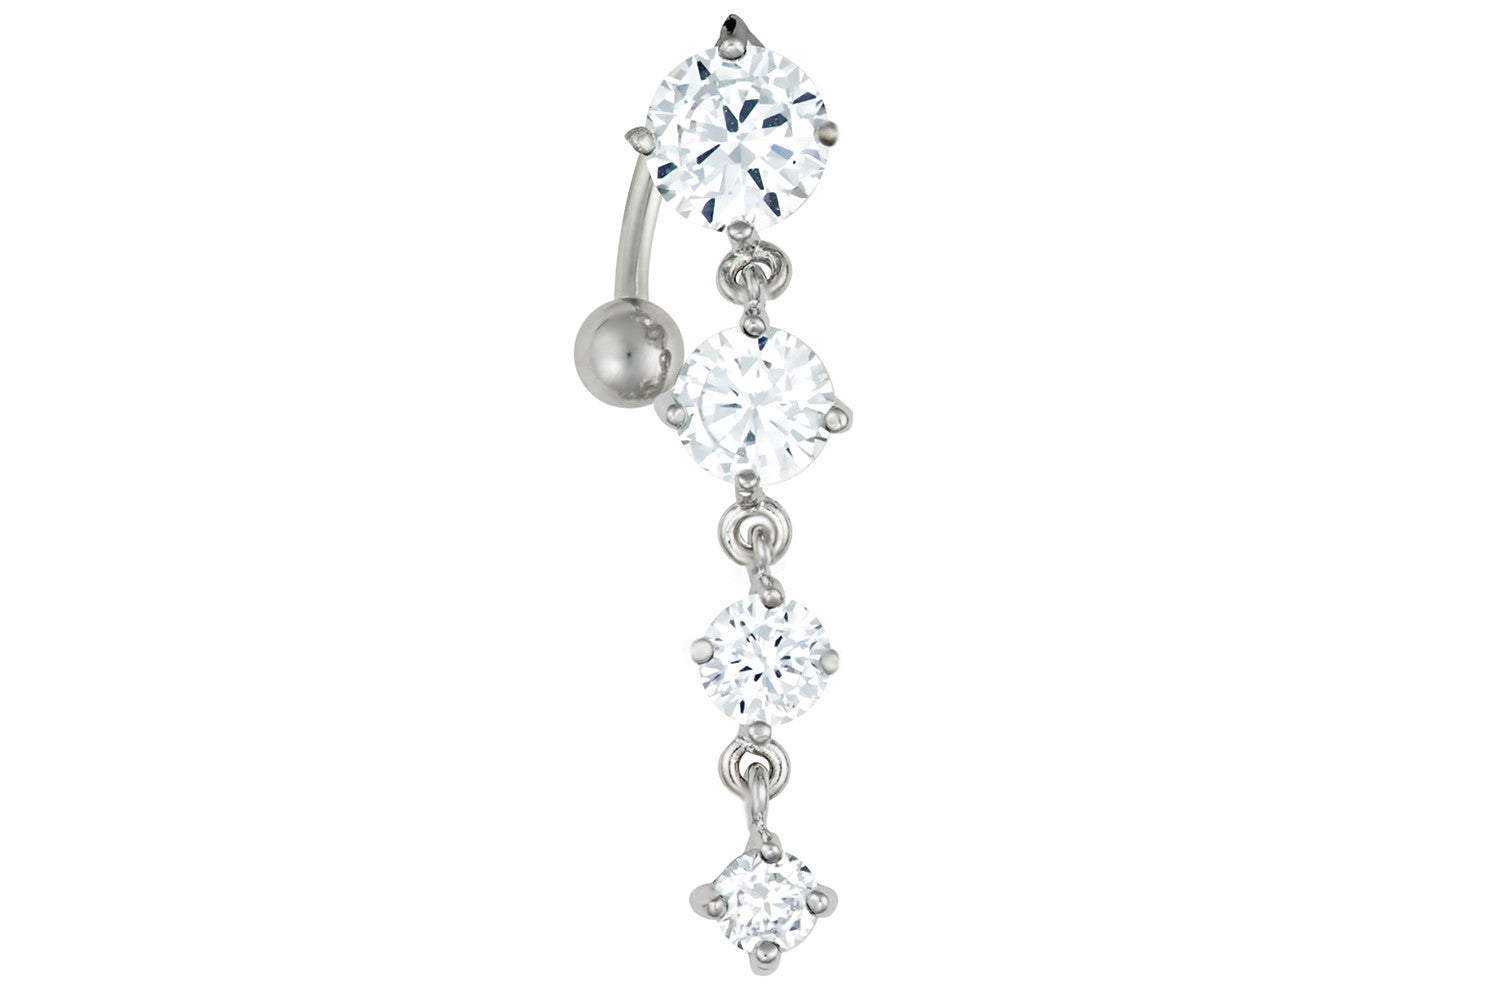 This 14 gauge sexy dangle belly ring is made with surgical grade 316L stainless steel. The barbell is 3/8" long and the total dangle length of the four cascading crystals is 1 3/8".